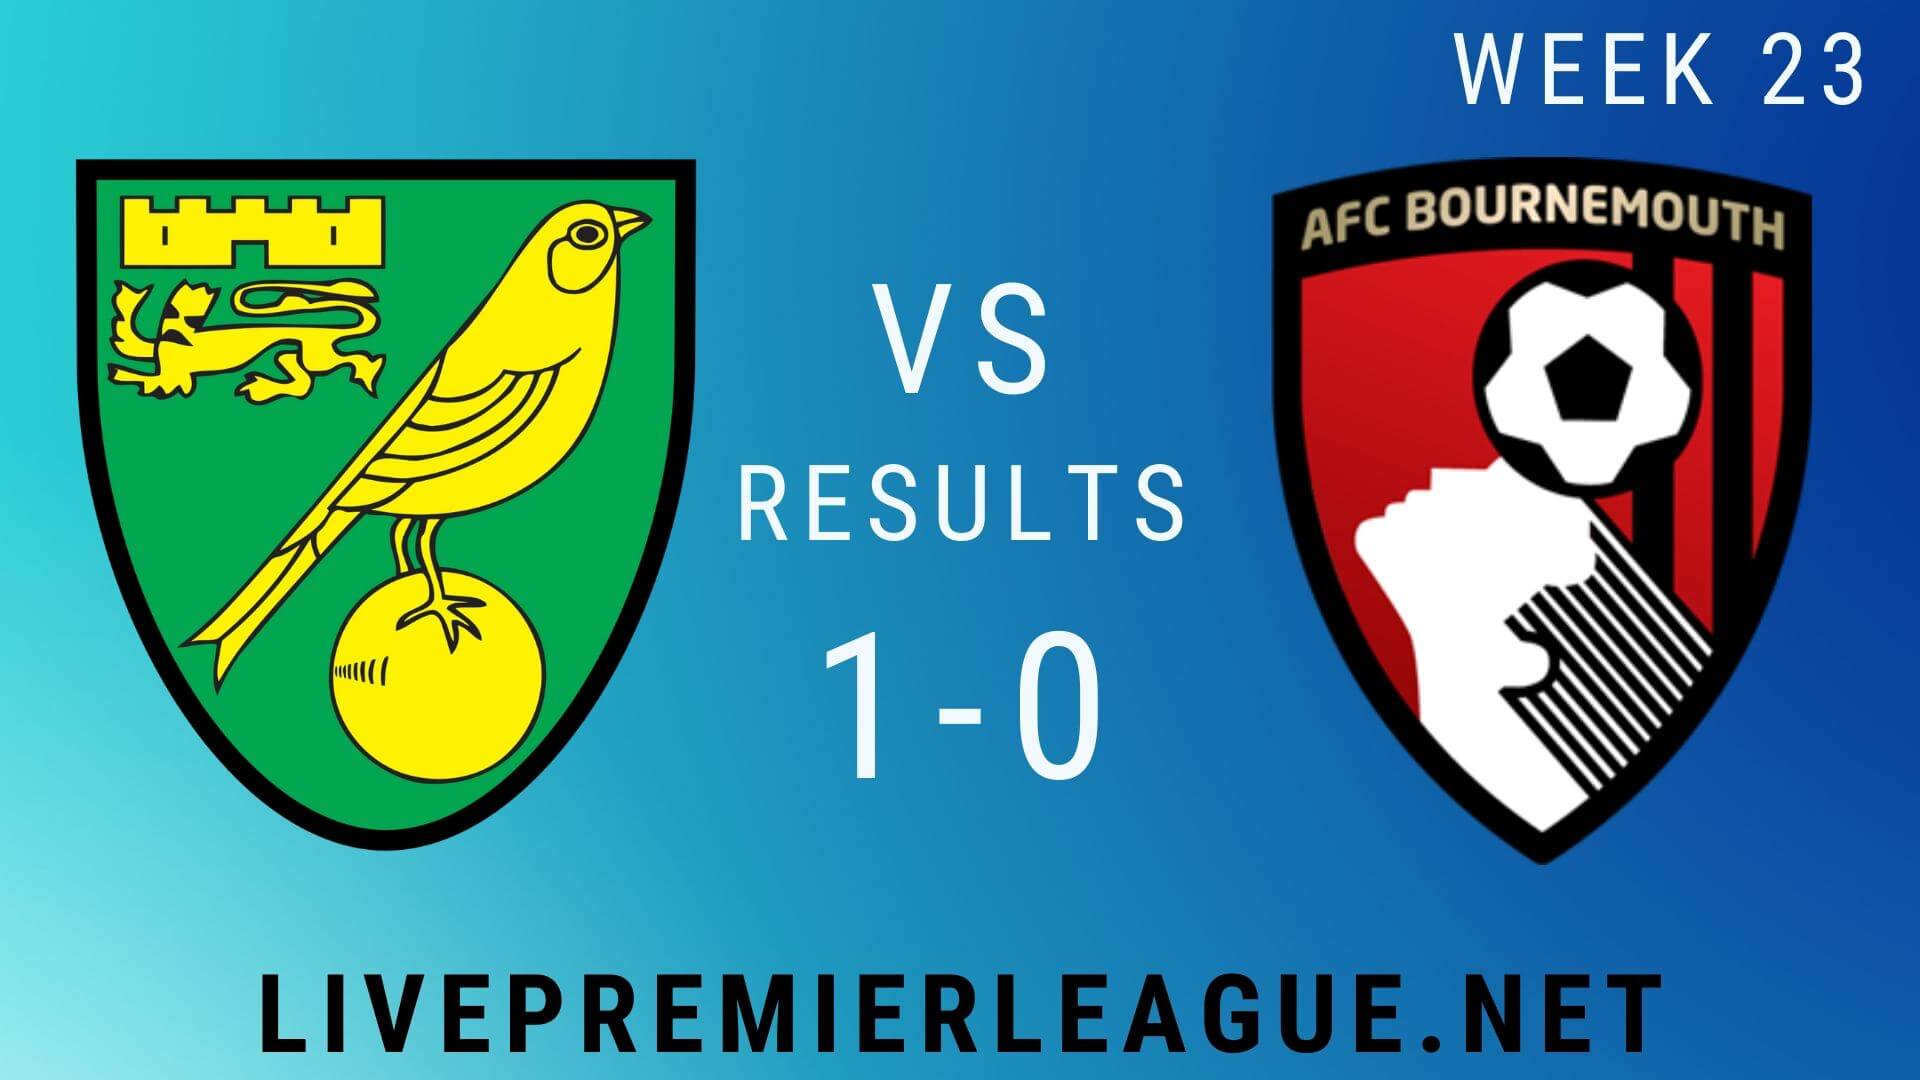 Norwich City Vs AFC Bournemouth | Week 23 Result 2020